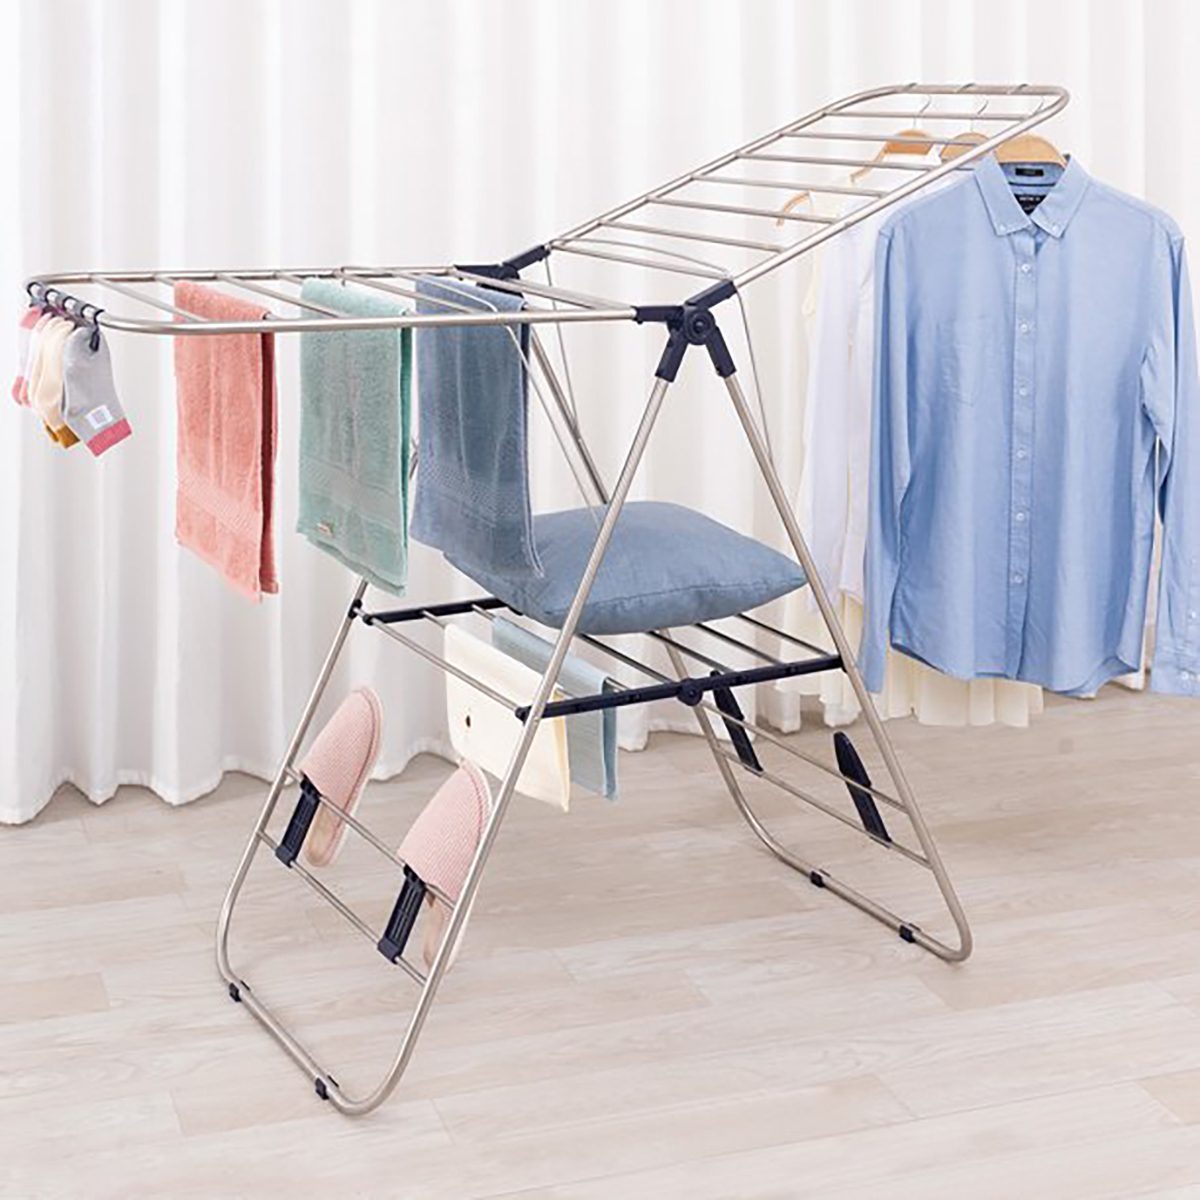 Stainless Steel Clothe Drying Rack Laundry Drip Hanger 24 Clip